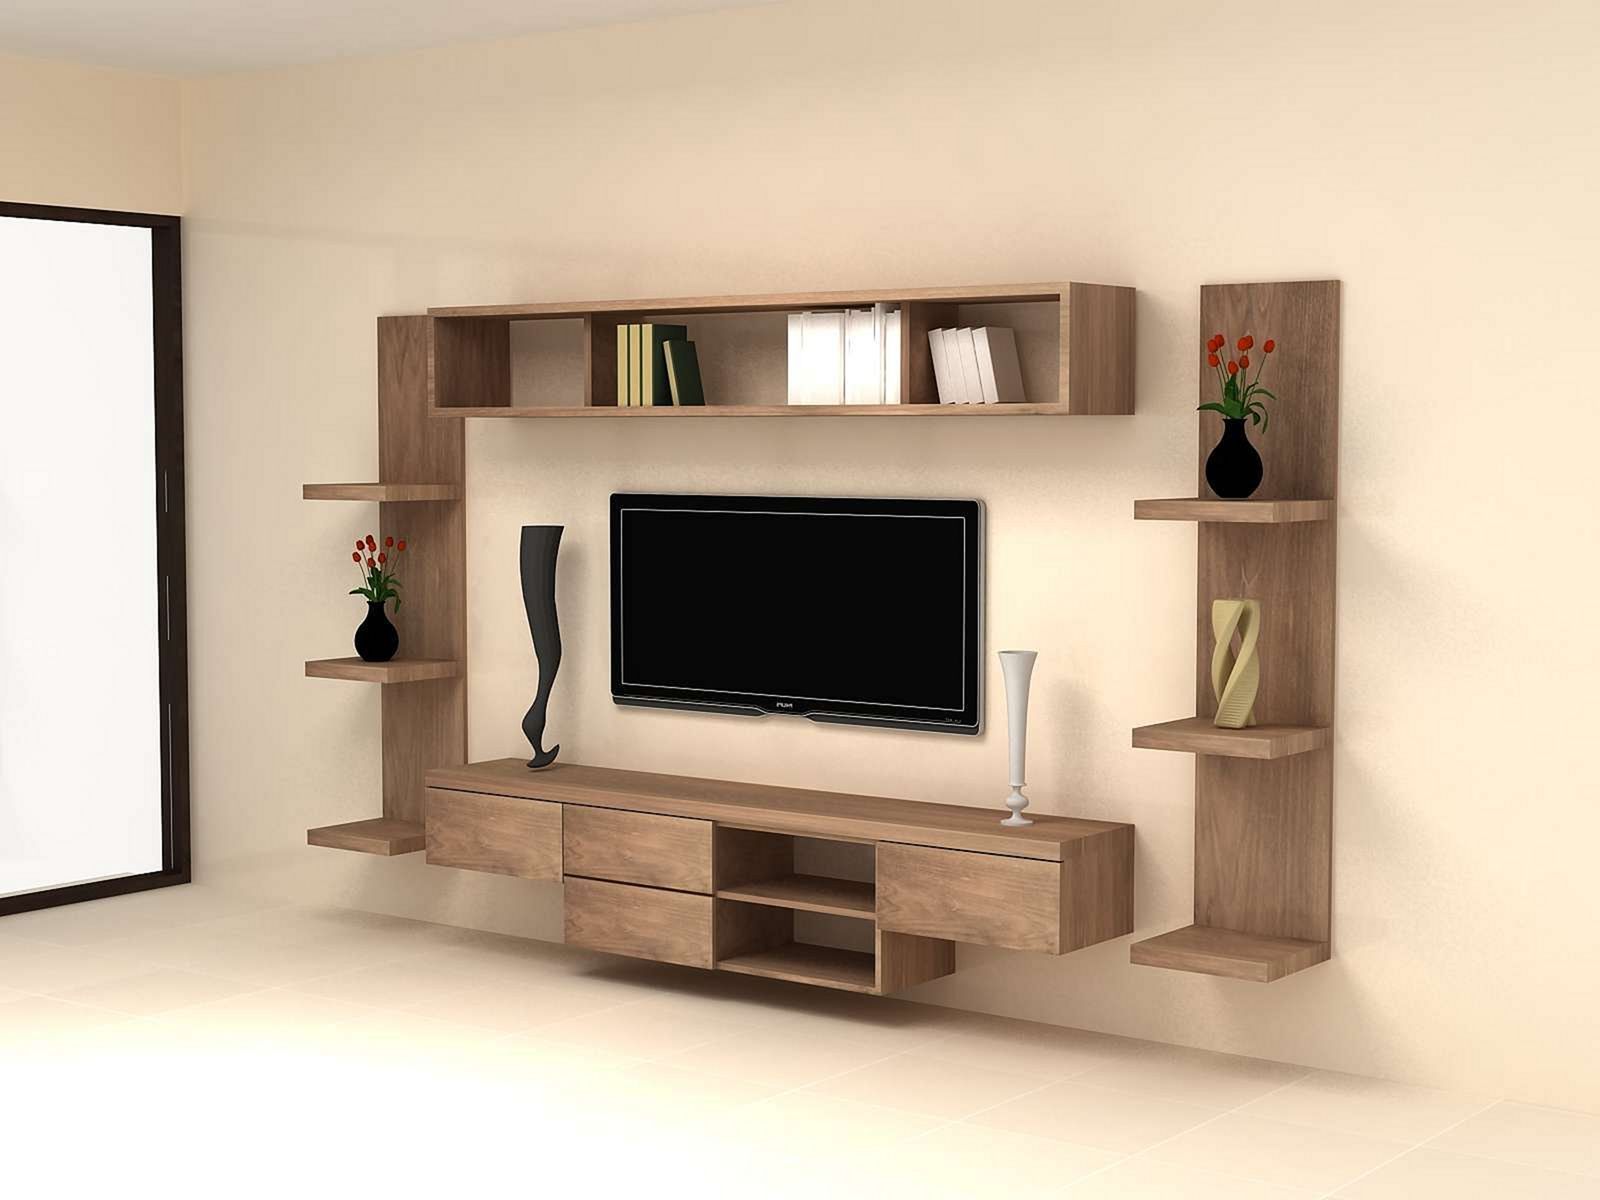 28 Amazing Modern Tv Cabinets Design For Your Home With Regard To Wall Display Units And Tv Cabinets (View 1 of 15)